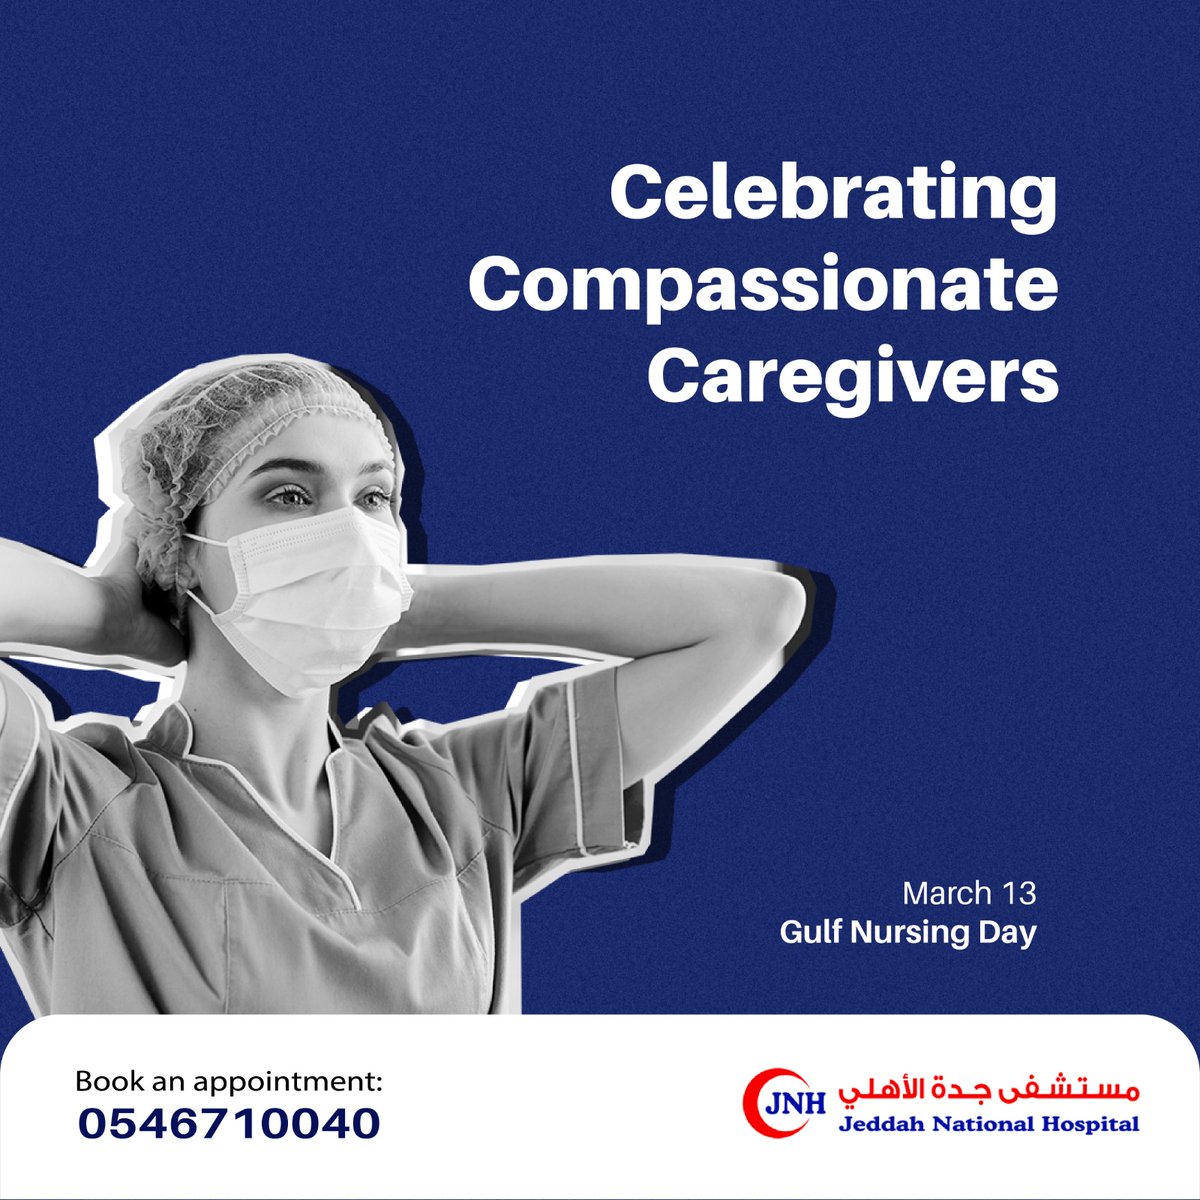 Celebrating the unwavering dedication and compassionate care provided by our nursing team on Gulf Nursing Day. #HonoringHealthcareHeroes

#JeddahNationalHospital #Jeddah #Hospital #Healthcare #Care #Consult #Today #hospital #GulfNursingDay #NursingDay #Nursing #Dedication #Health